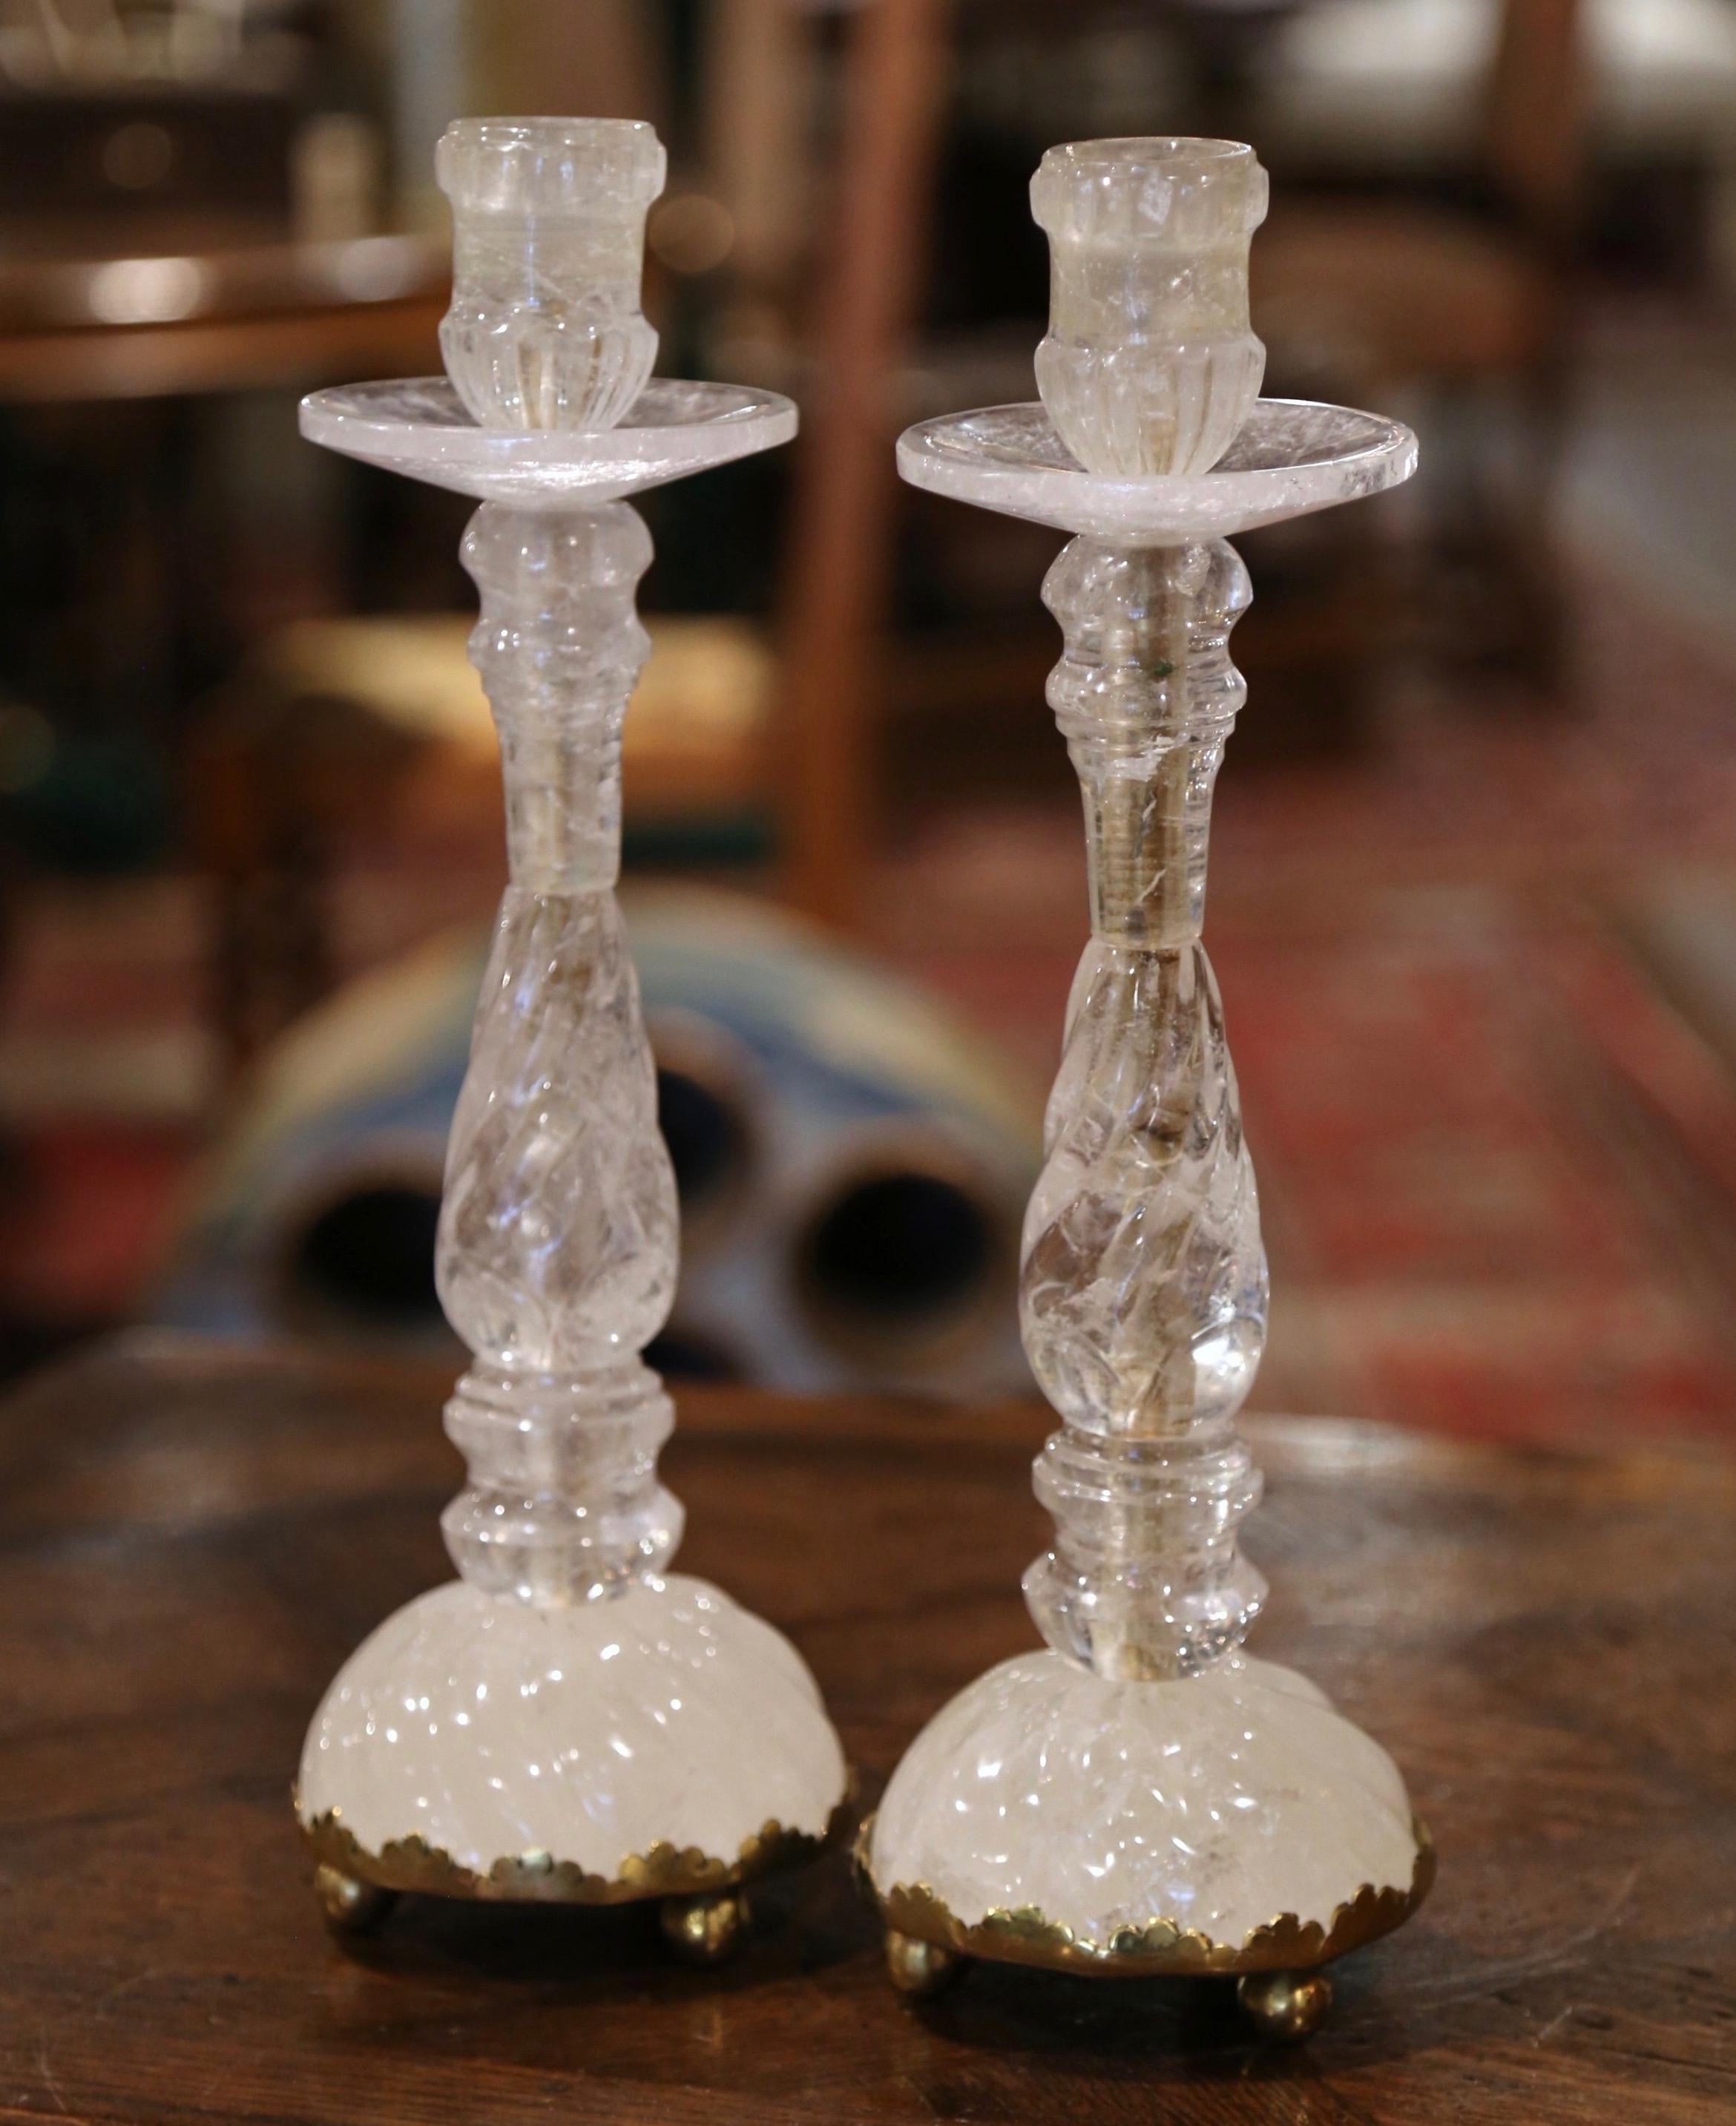 These elegant rock crystal candlesticks were crafted in Italy. Each vintage candle holder sits on a sturdy round brass base dressed with ball feet, and features exquisite craftsmanship throughout. The candlesticks have a carved tapered and twisted